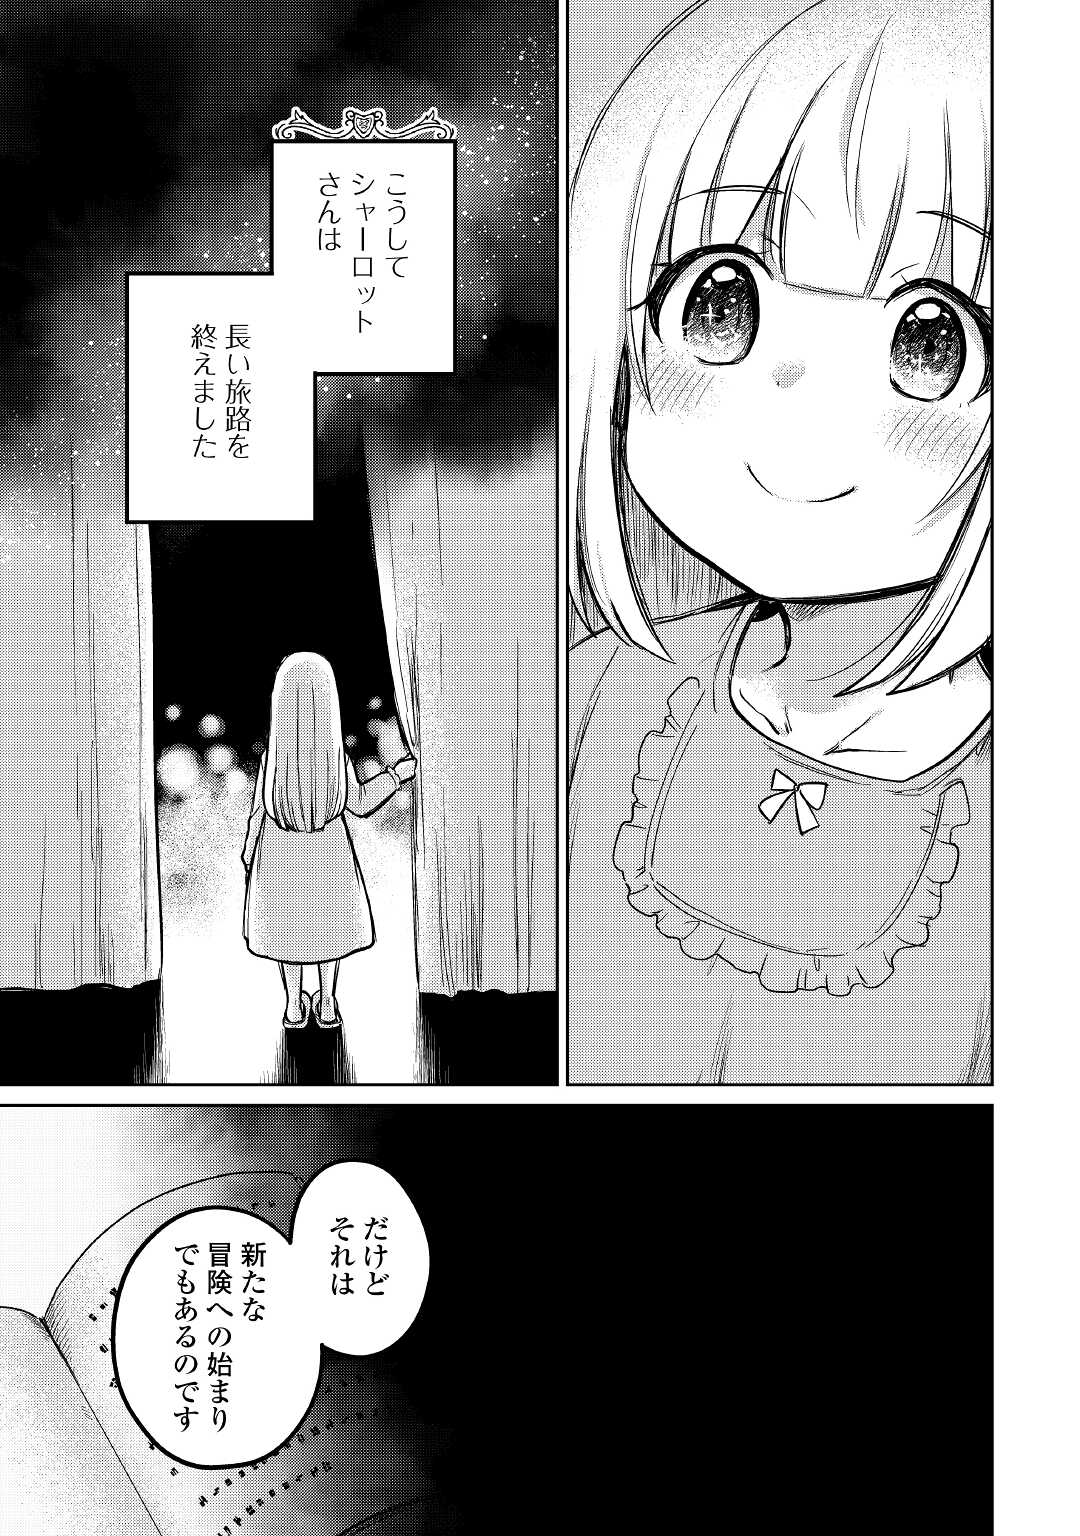 The Former Structural Researcher’s Story of Otherworldly Adventure 第42話 - Page 27